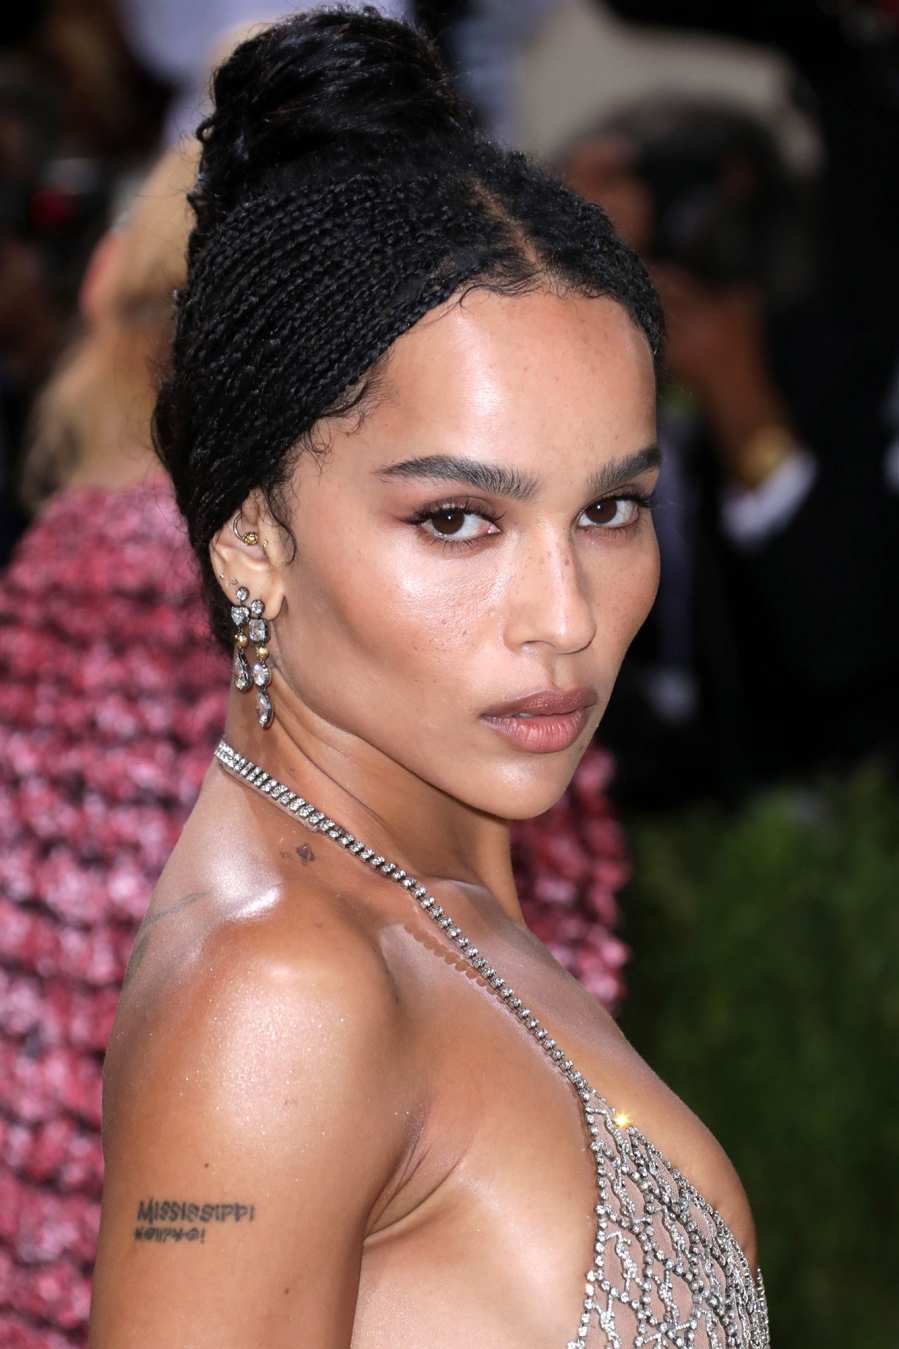 Channing Tatum and Zoe Kravitz Step Out at 2021 Met Gala Solo 03